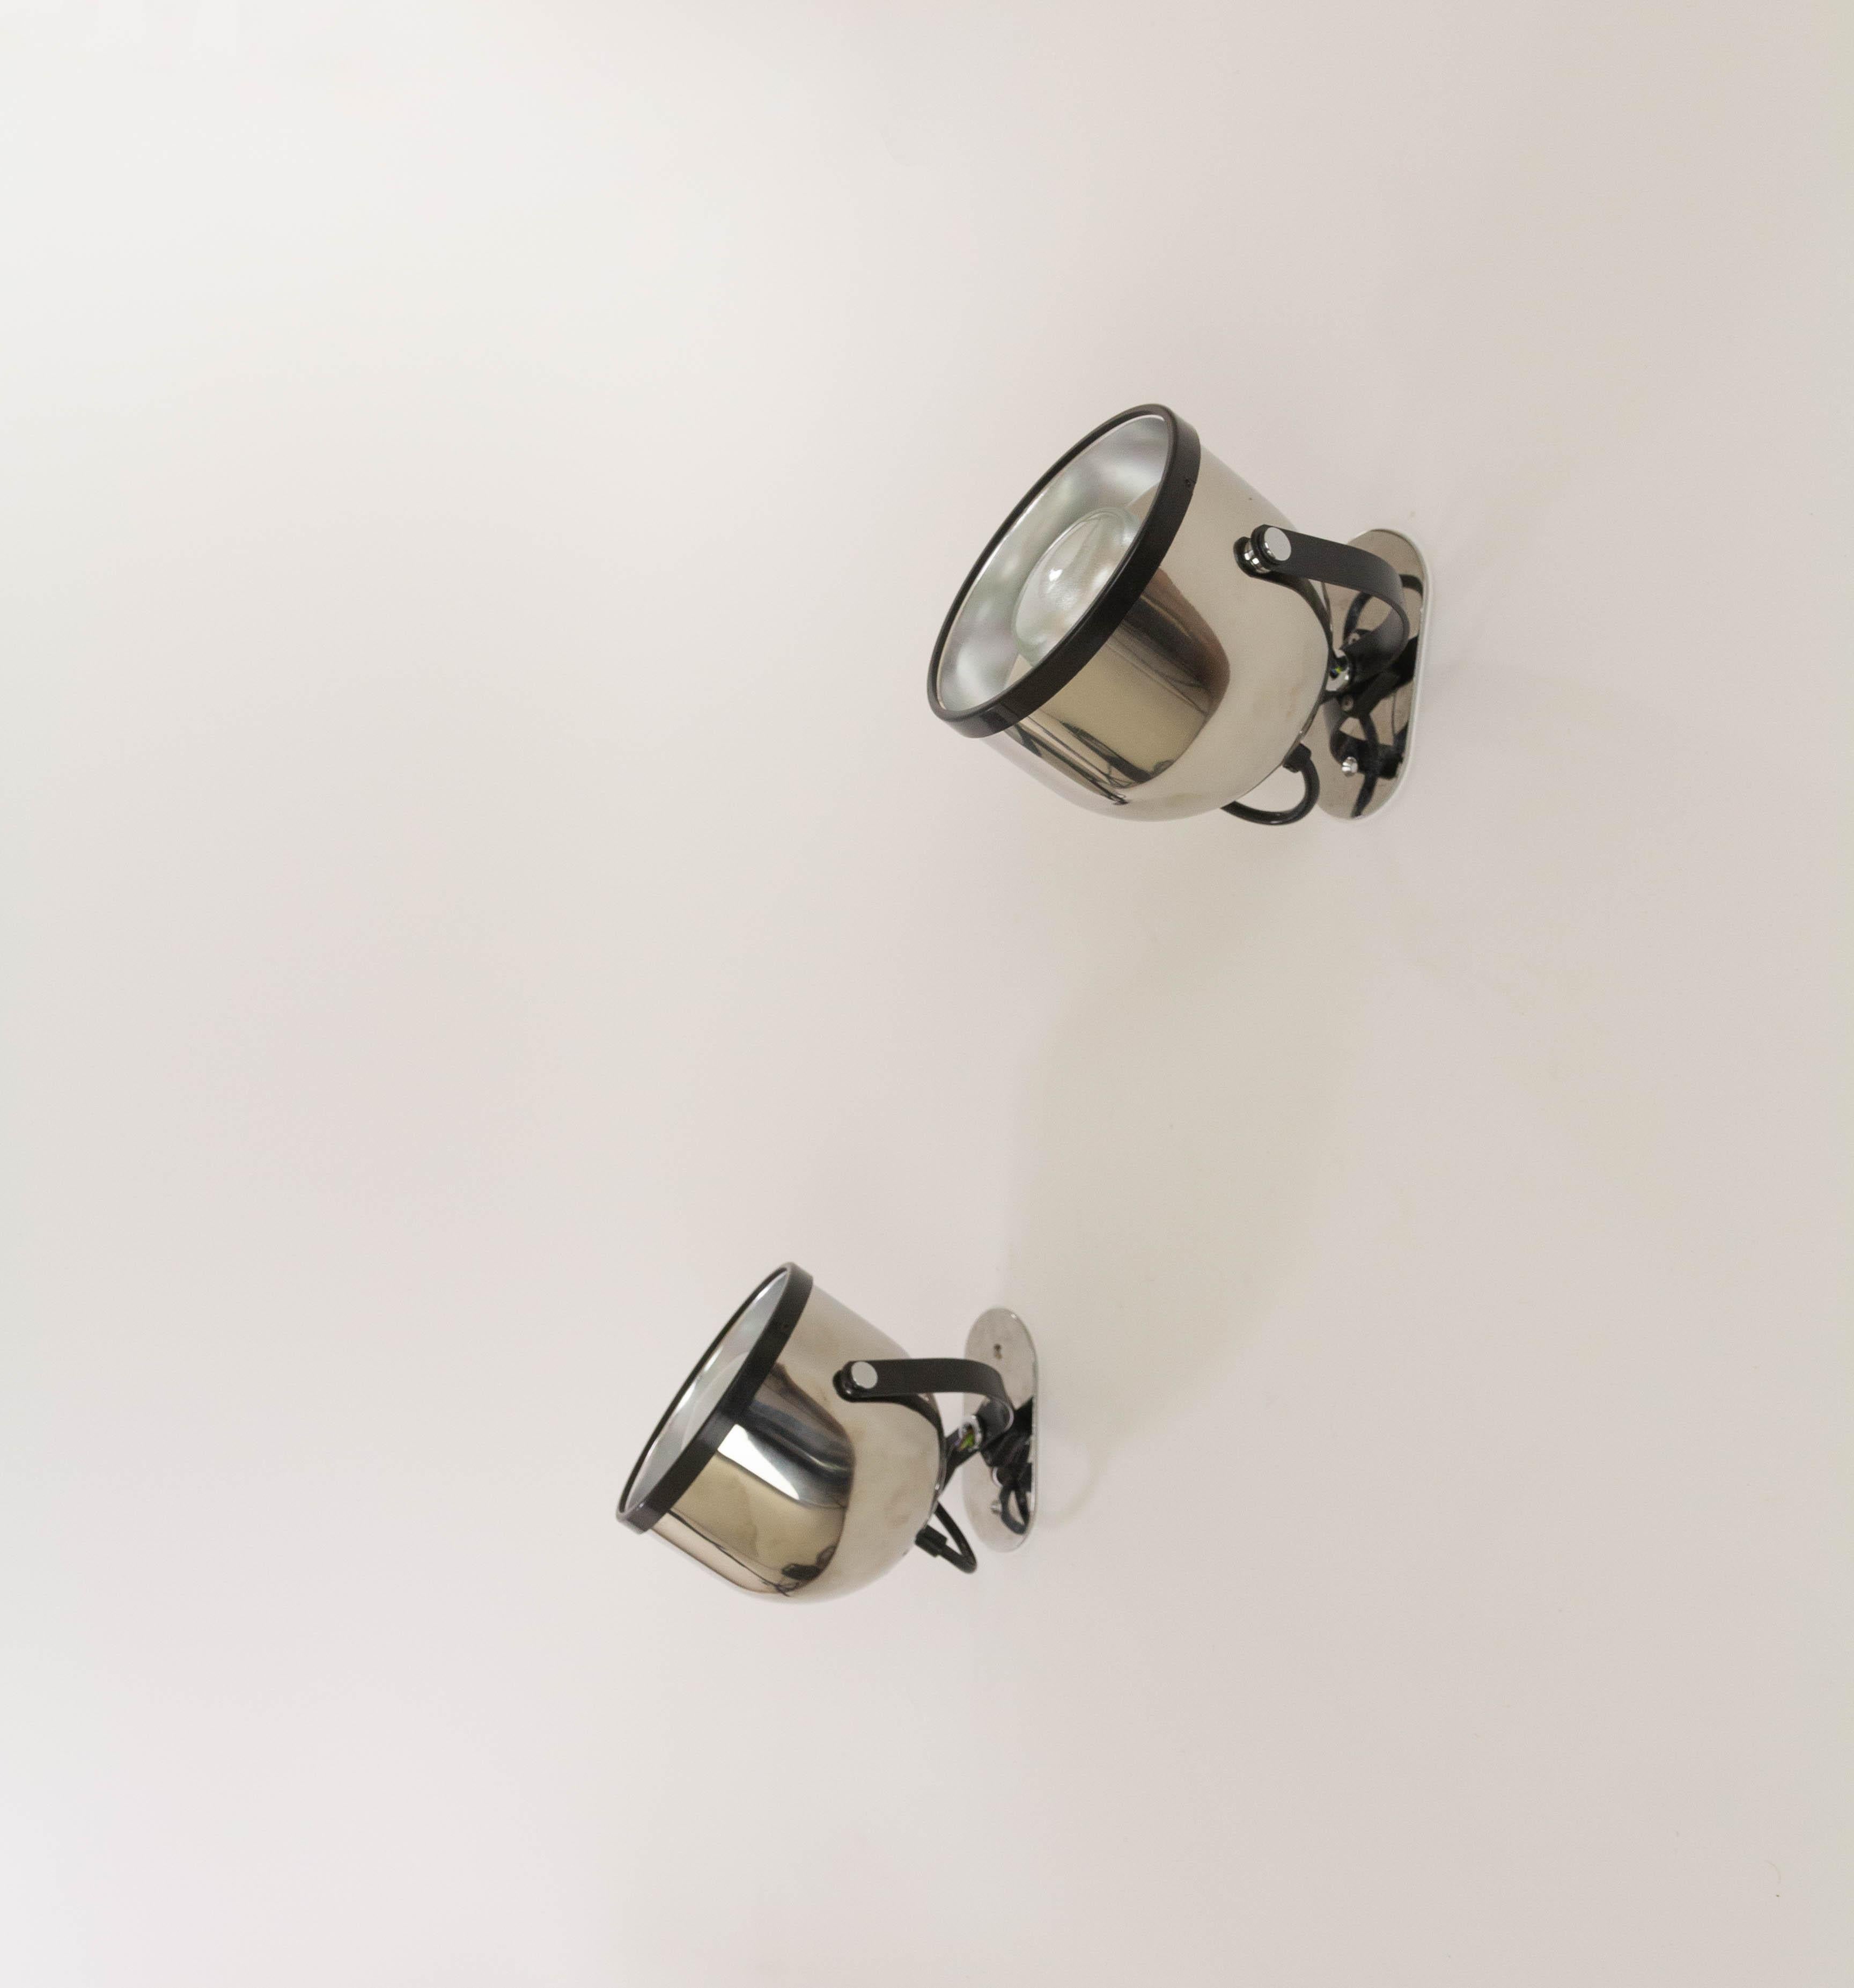 Pair swiveling spots made of chromed metal designed by Gae Aulenti and Livio Castiglioni for Stilnovo in the 1970s. The spots can also be used as ceiling lamps.

The spots or projectors are fitted with a double rotation movement, allowing them to